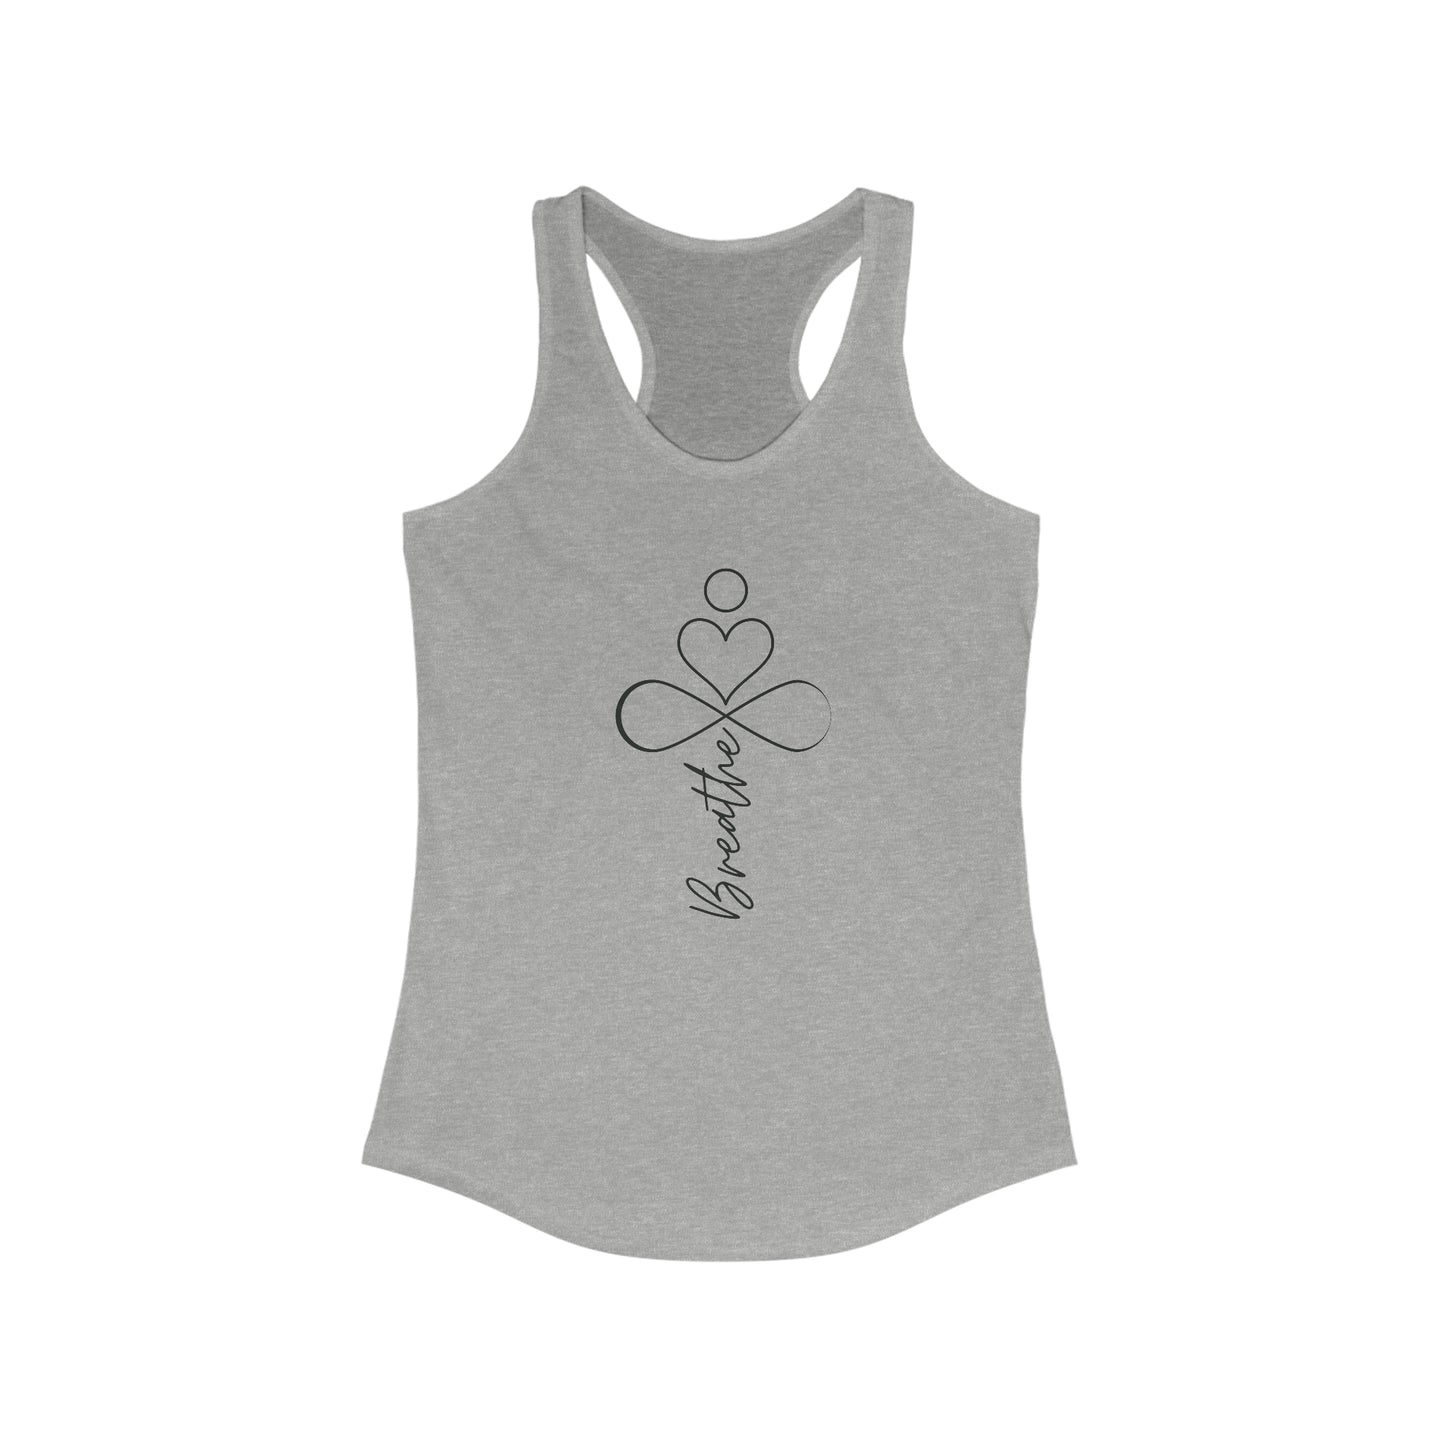 Breathe up - Yoga Inspired Tank Top